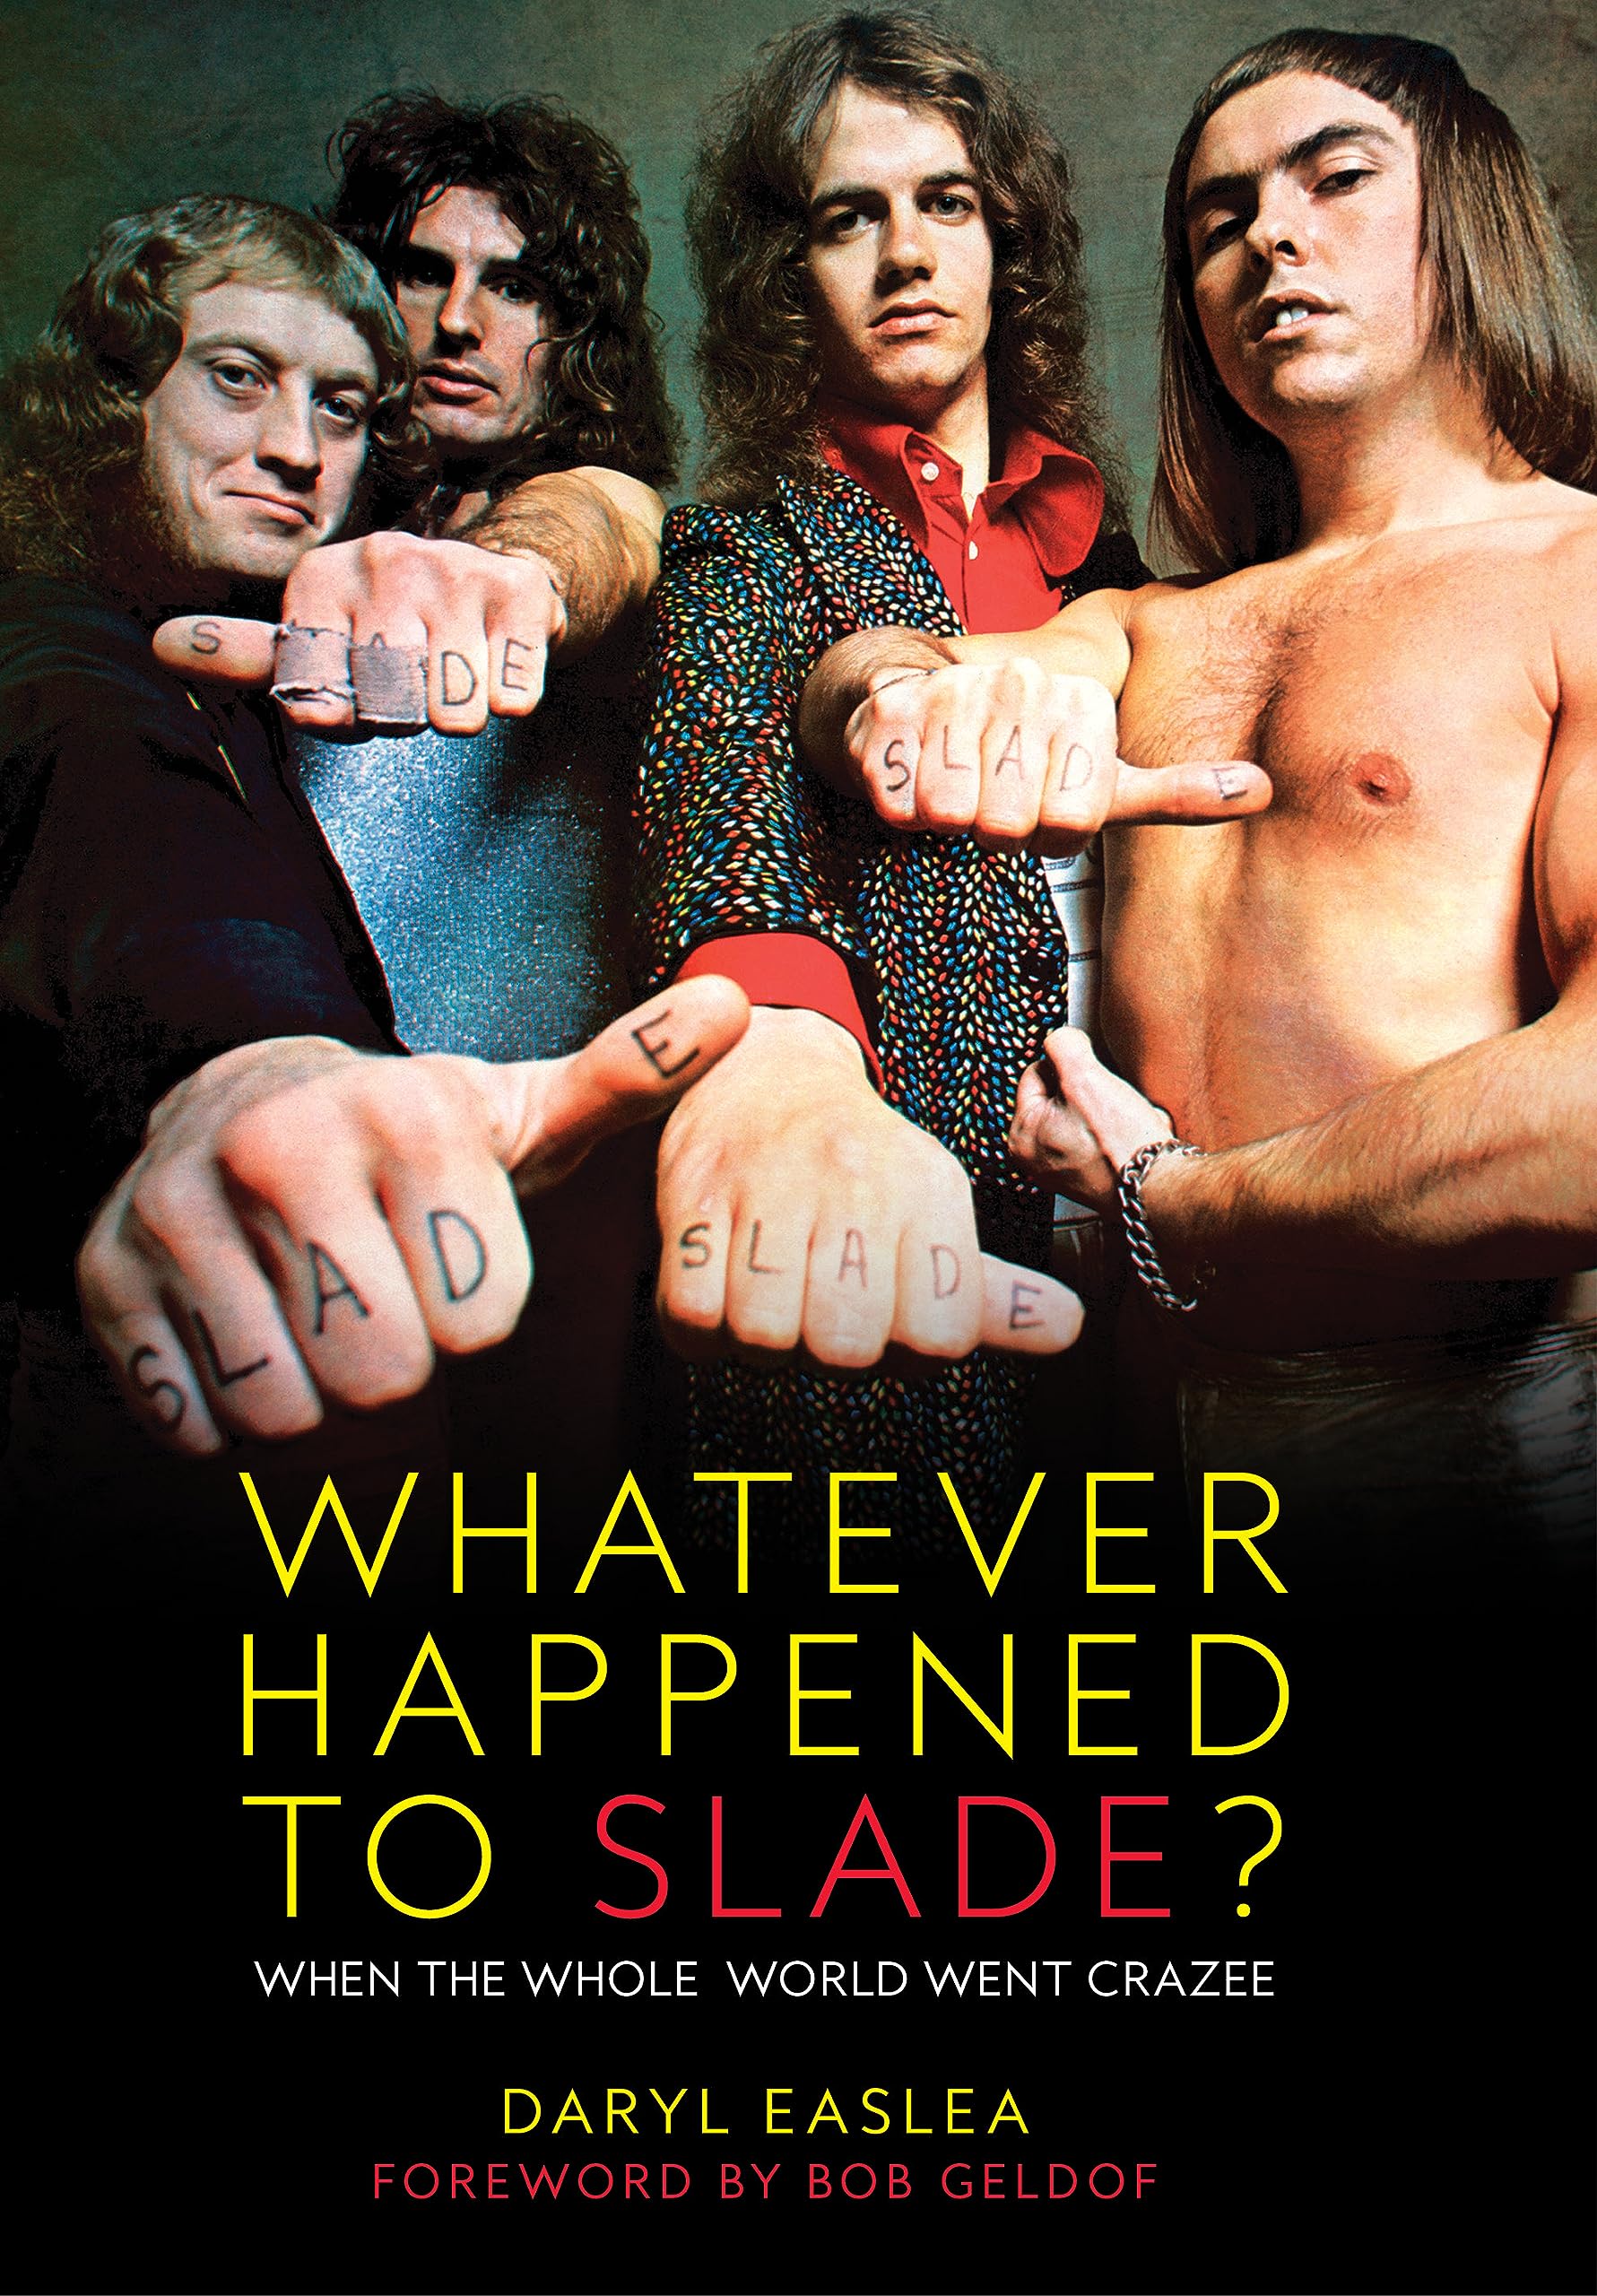 Whatever_happened_to_slade_book_cover.